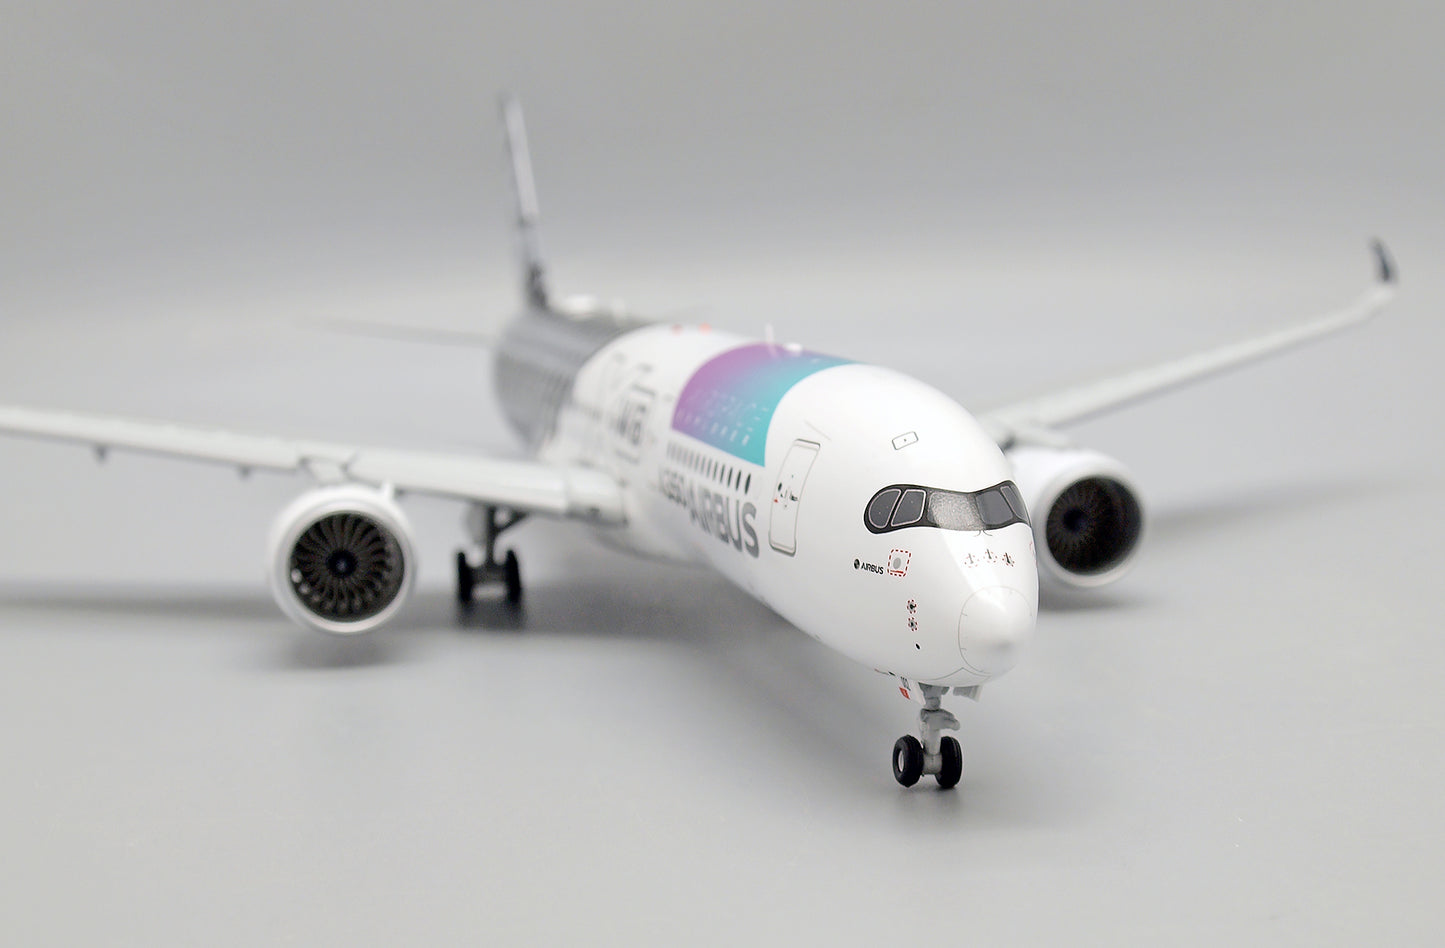 JC Wings 1:200 Airbus Industrie Airbus A350-900 LH2288A (Flaps Down)